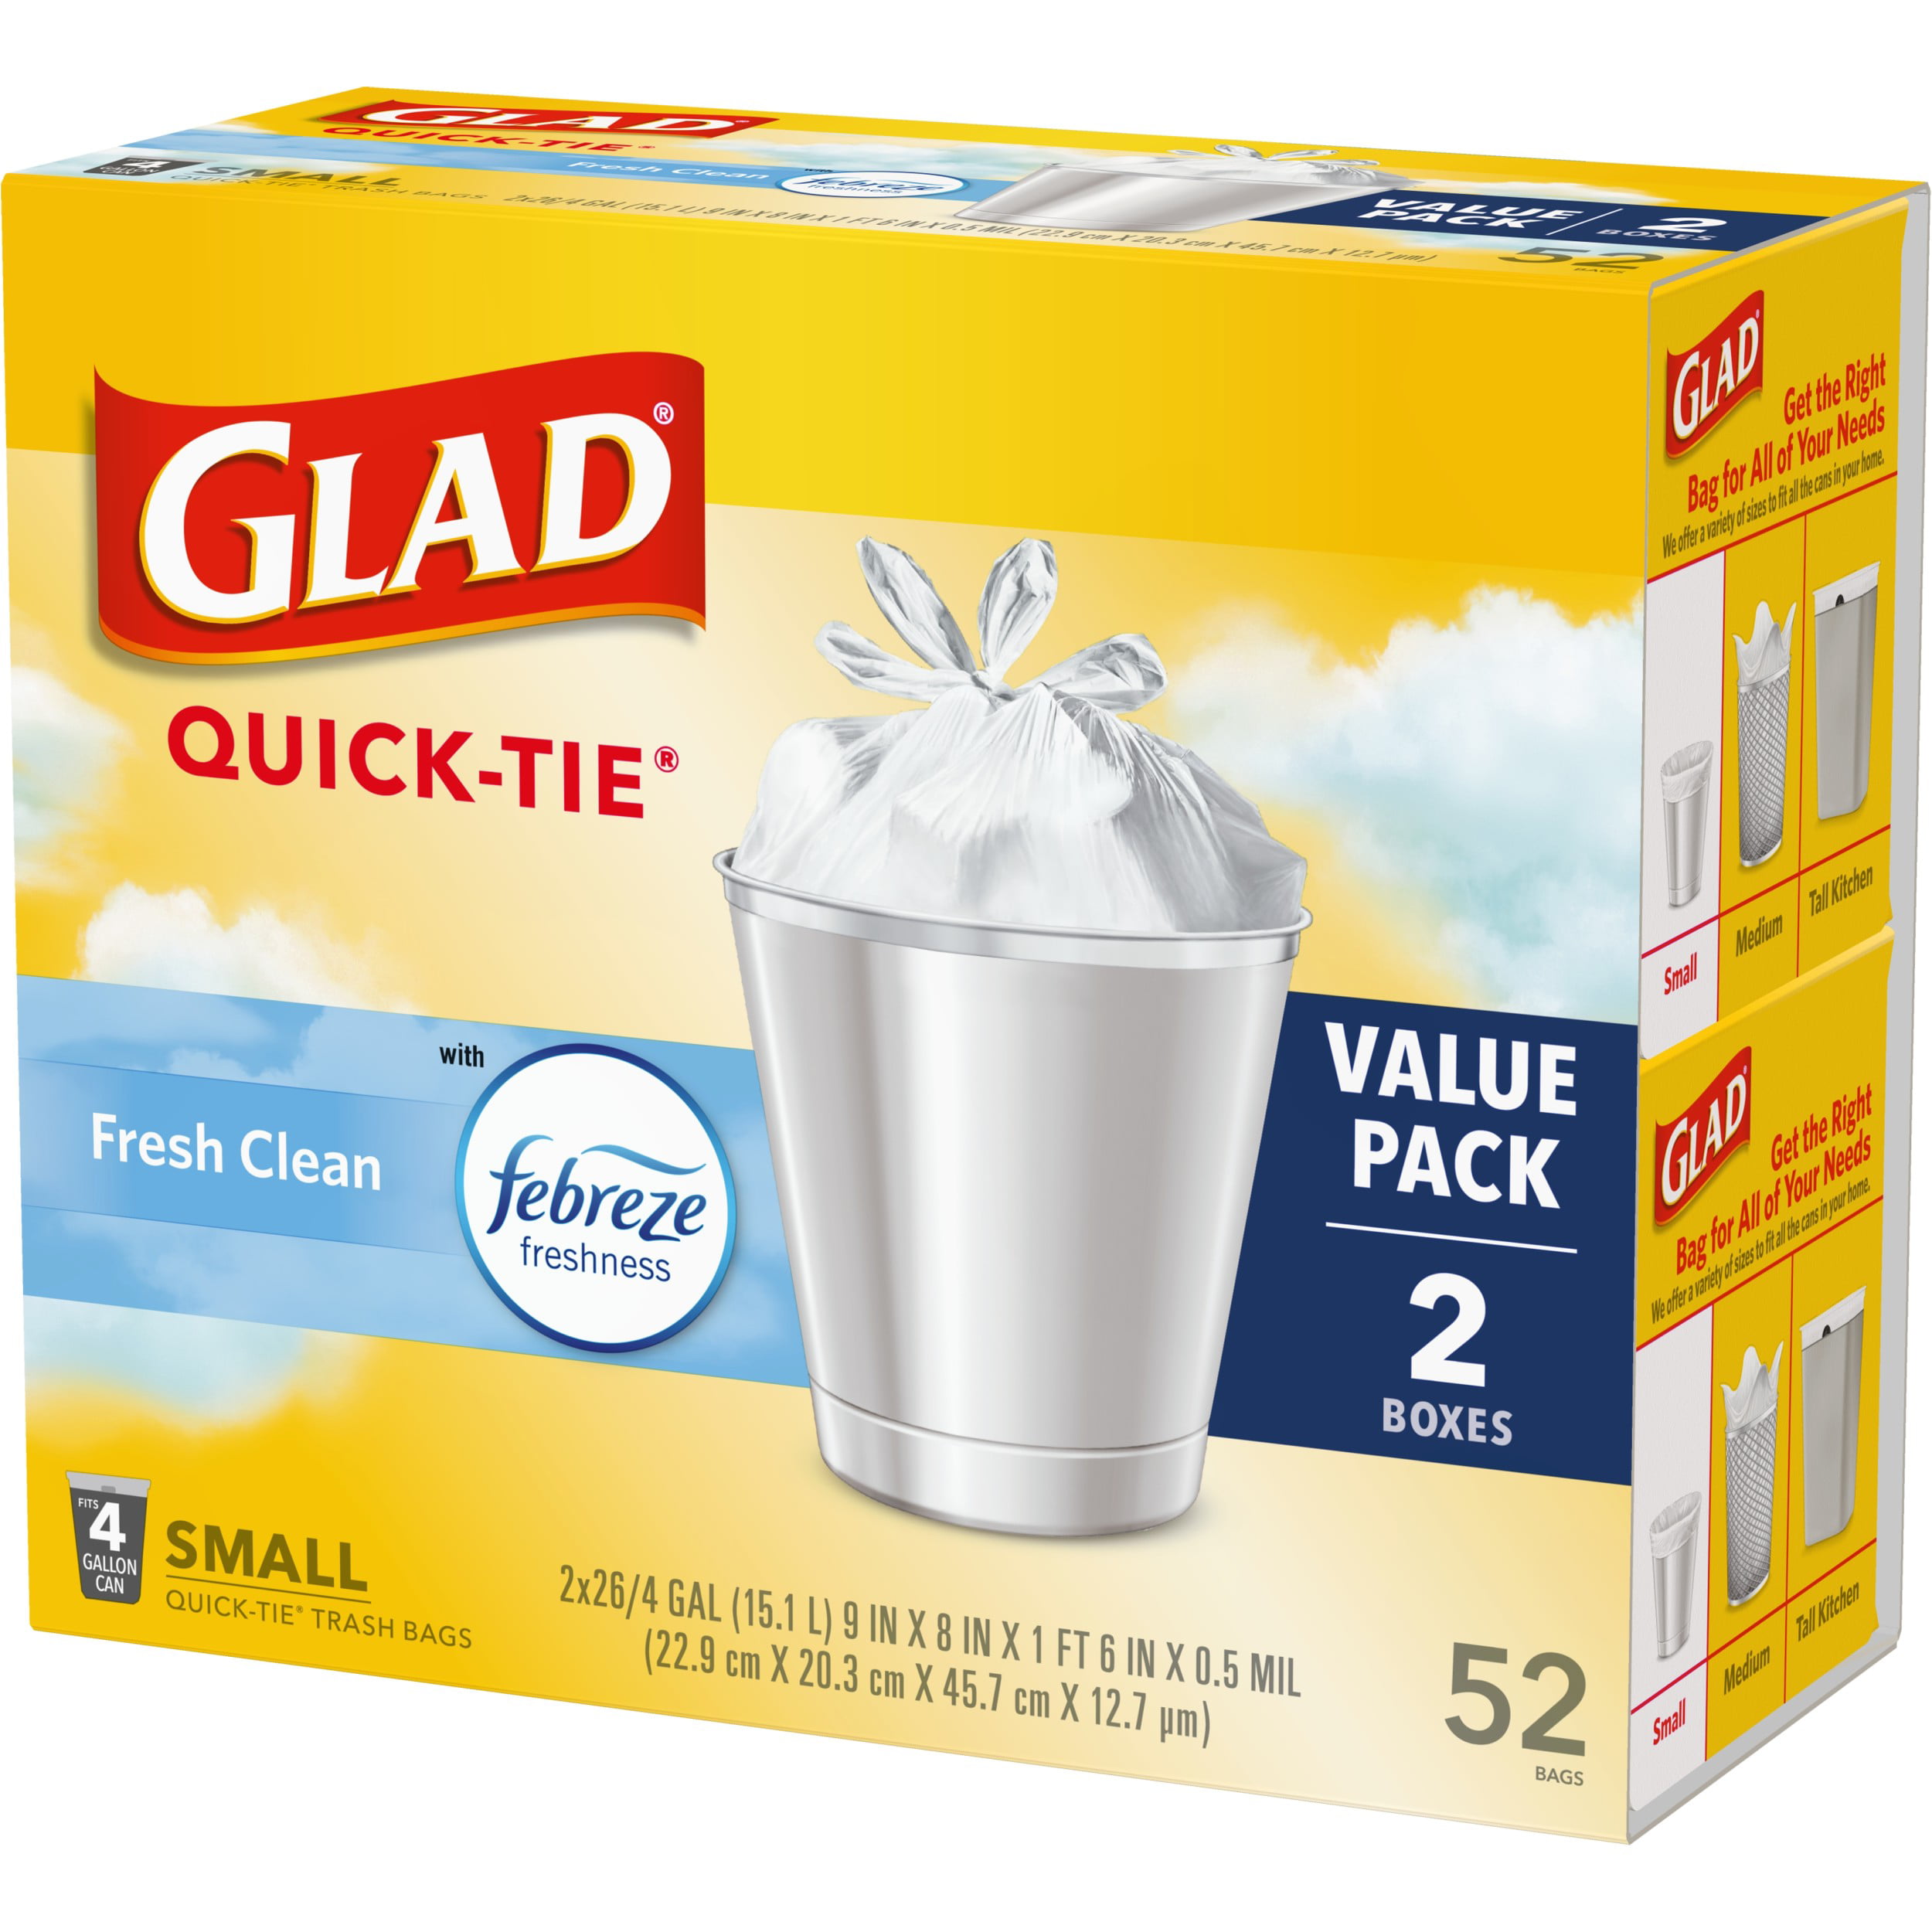 Glad Small Trash Bags, 4 Gallons, 30 ct, 1 - Kroger